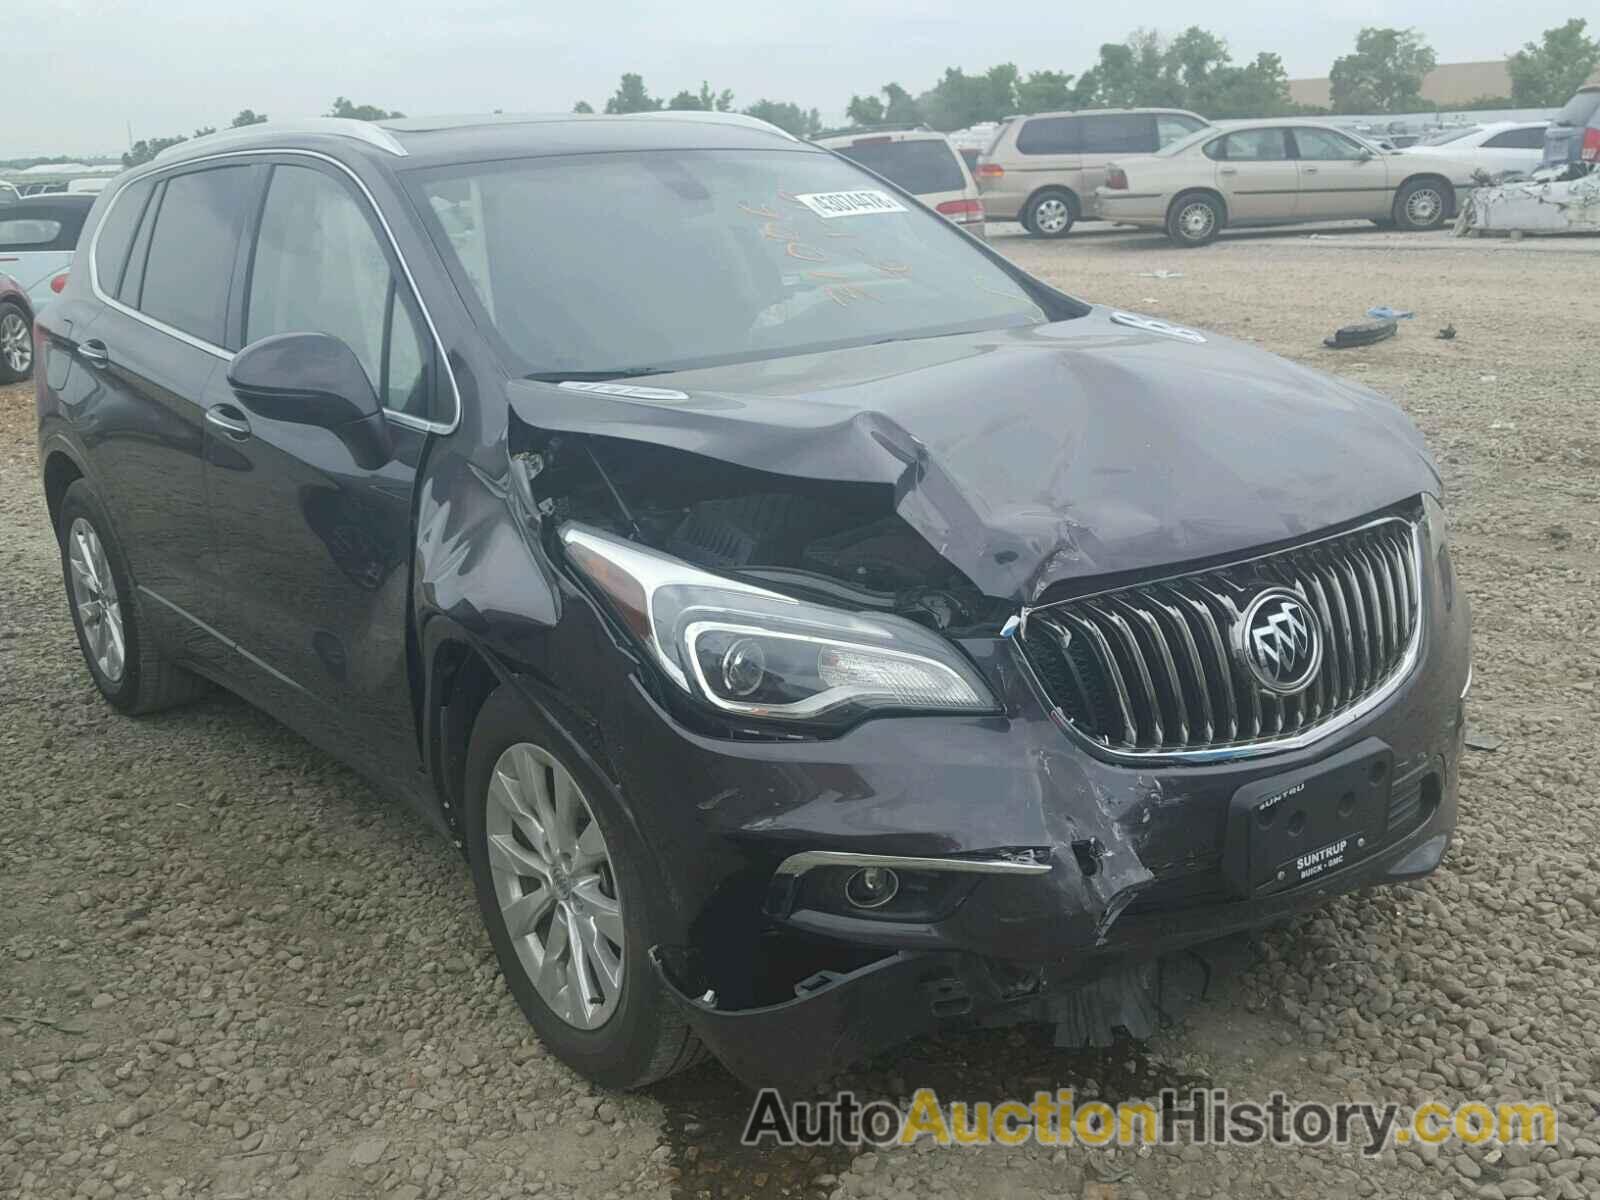 2017 BUICK ENVISION CONVENIENCE, LRBFXBSA6HD004368